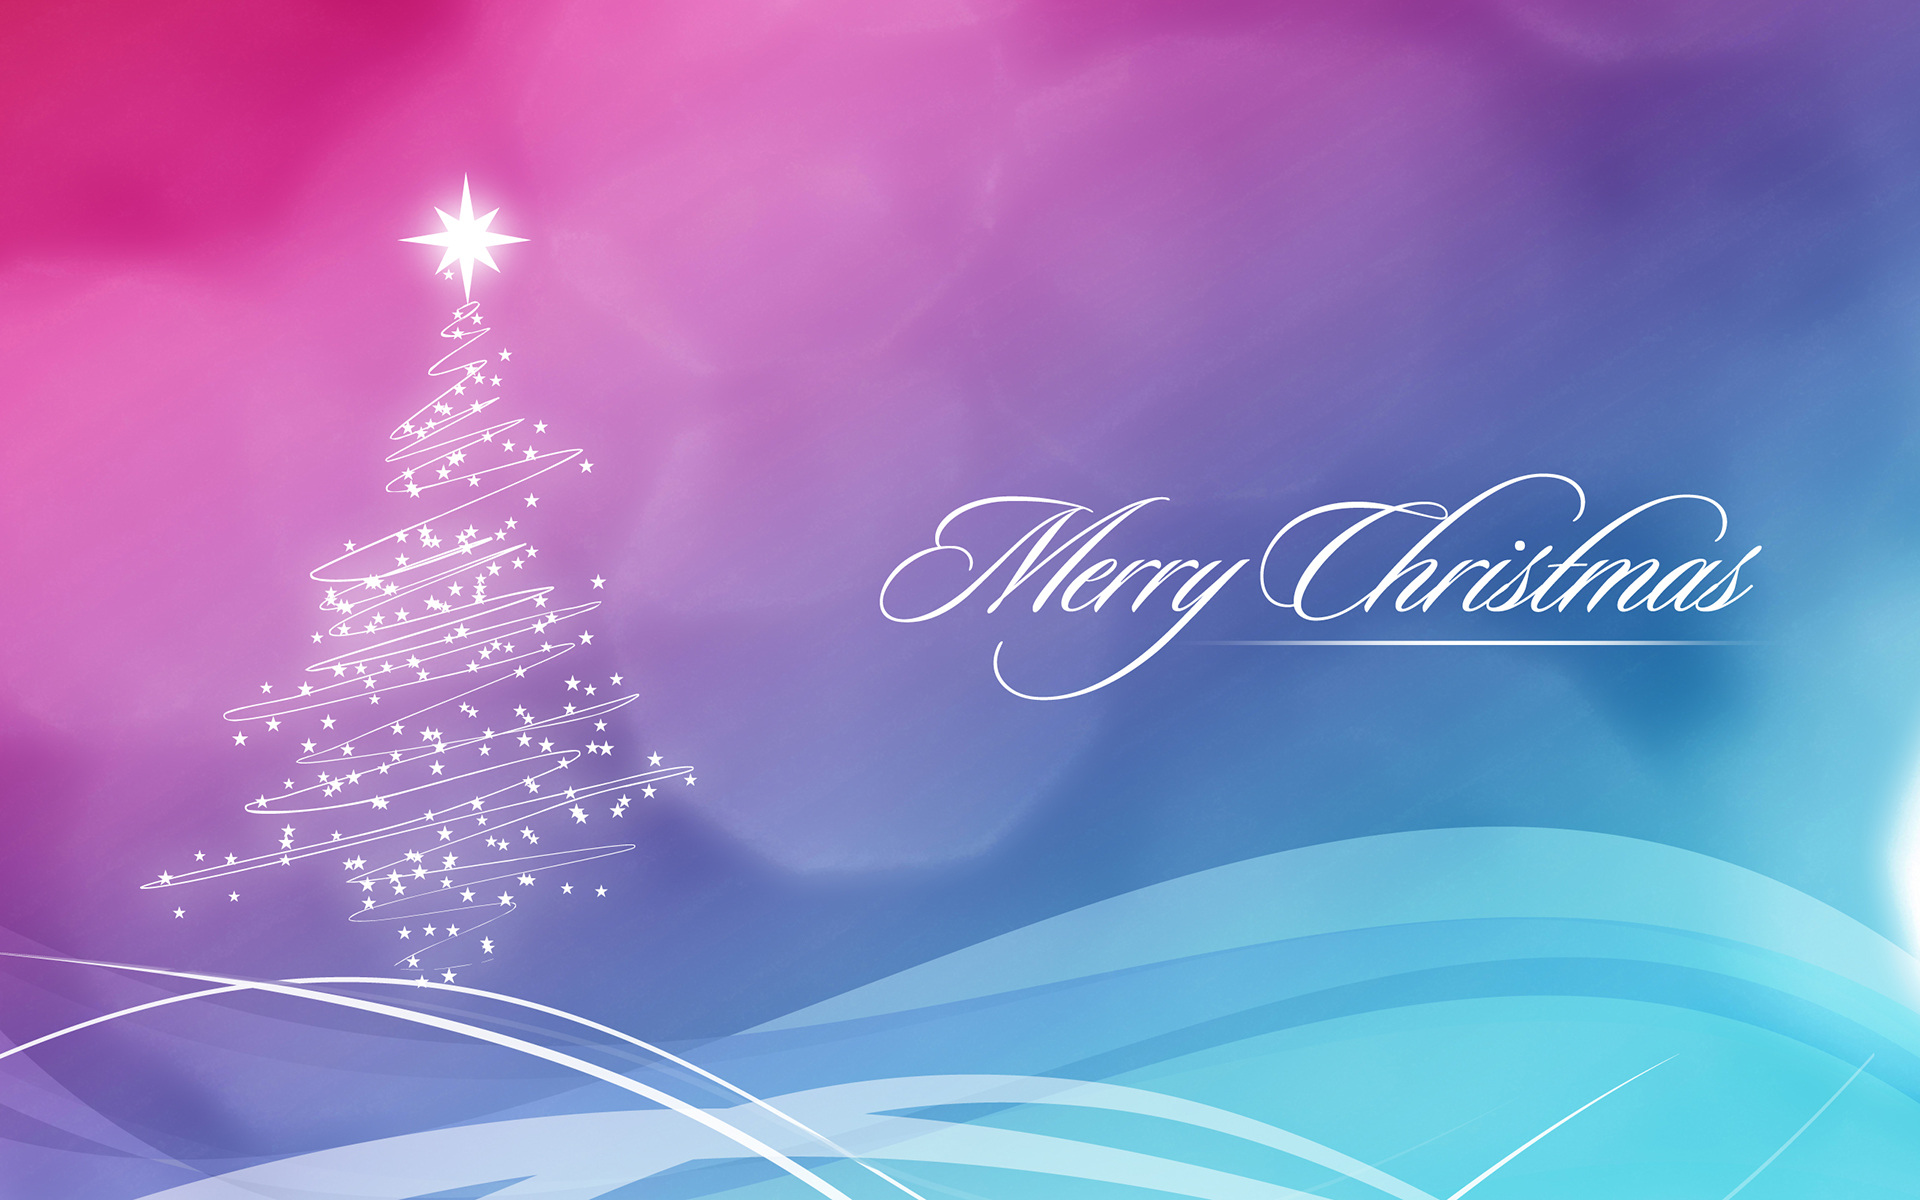 NEw Merry Christmas Images Pictures HD Wallpapers